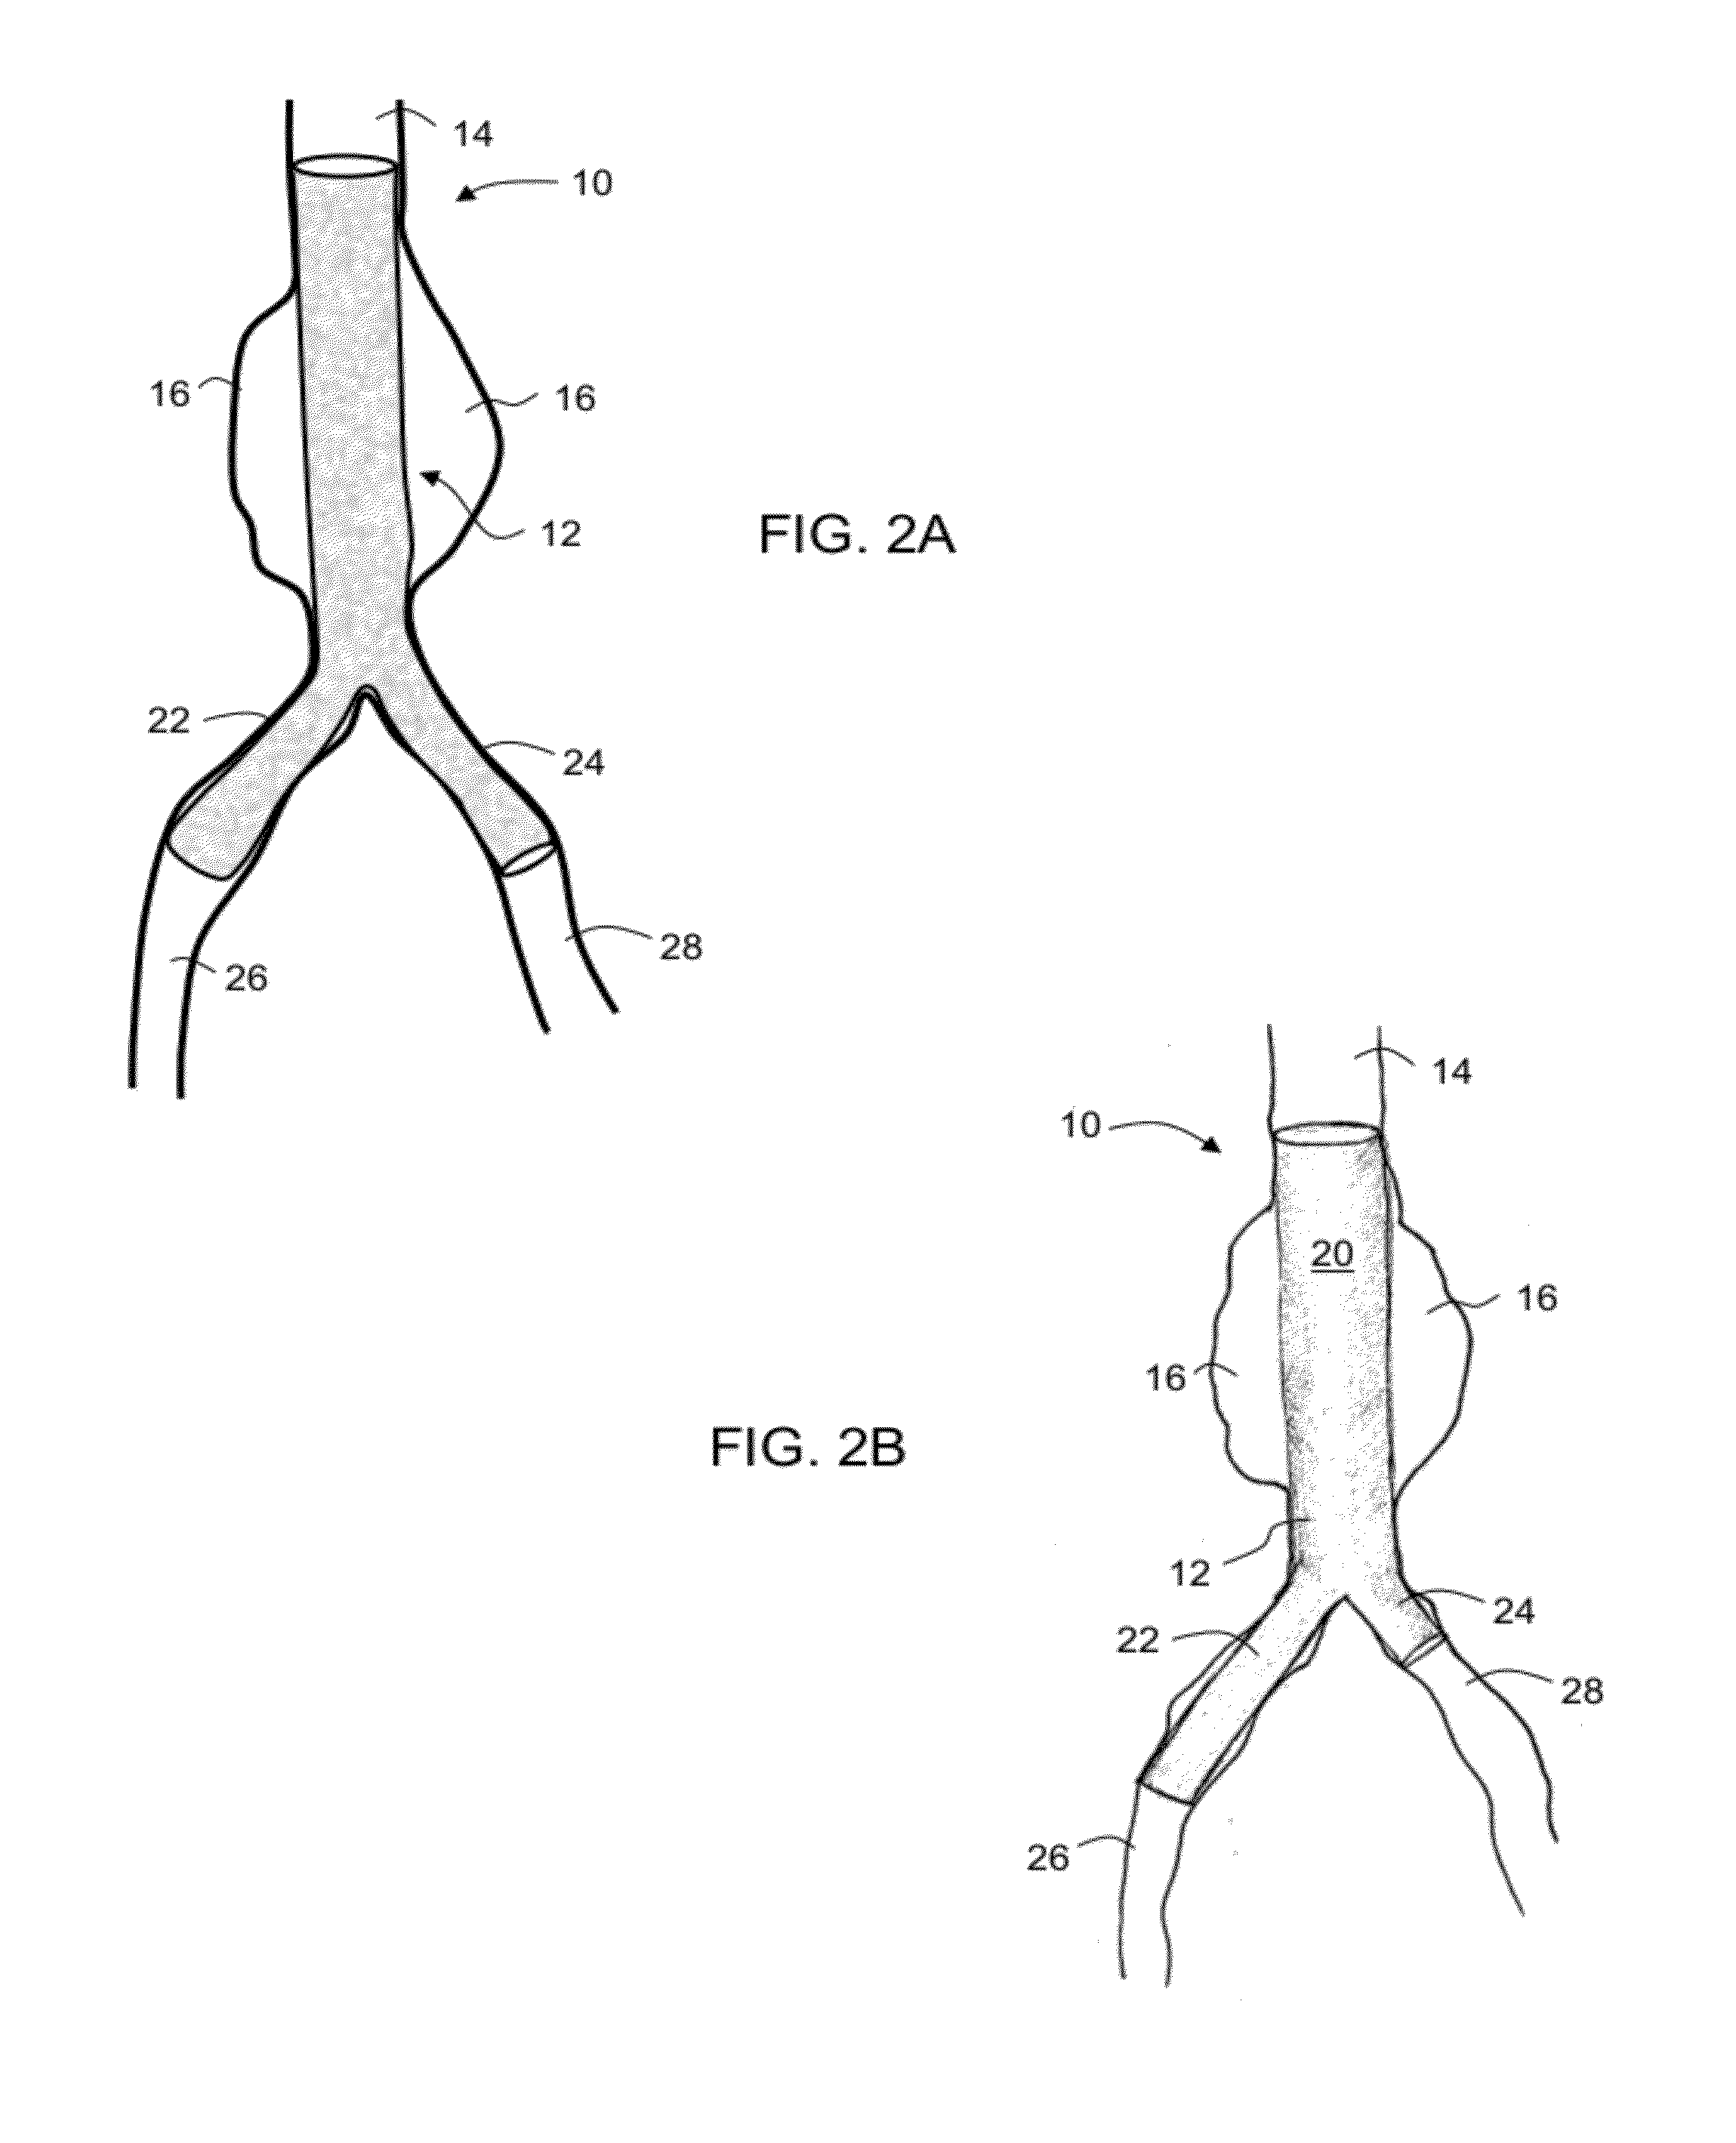 Intraluminal polymeric devices for the treatment of aneurysms